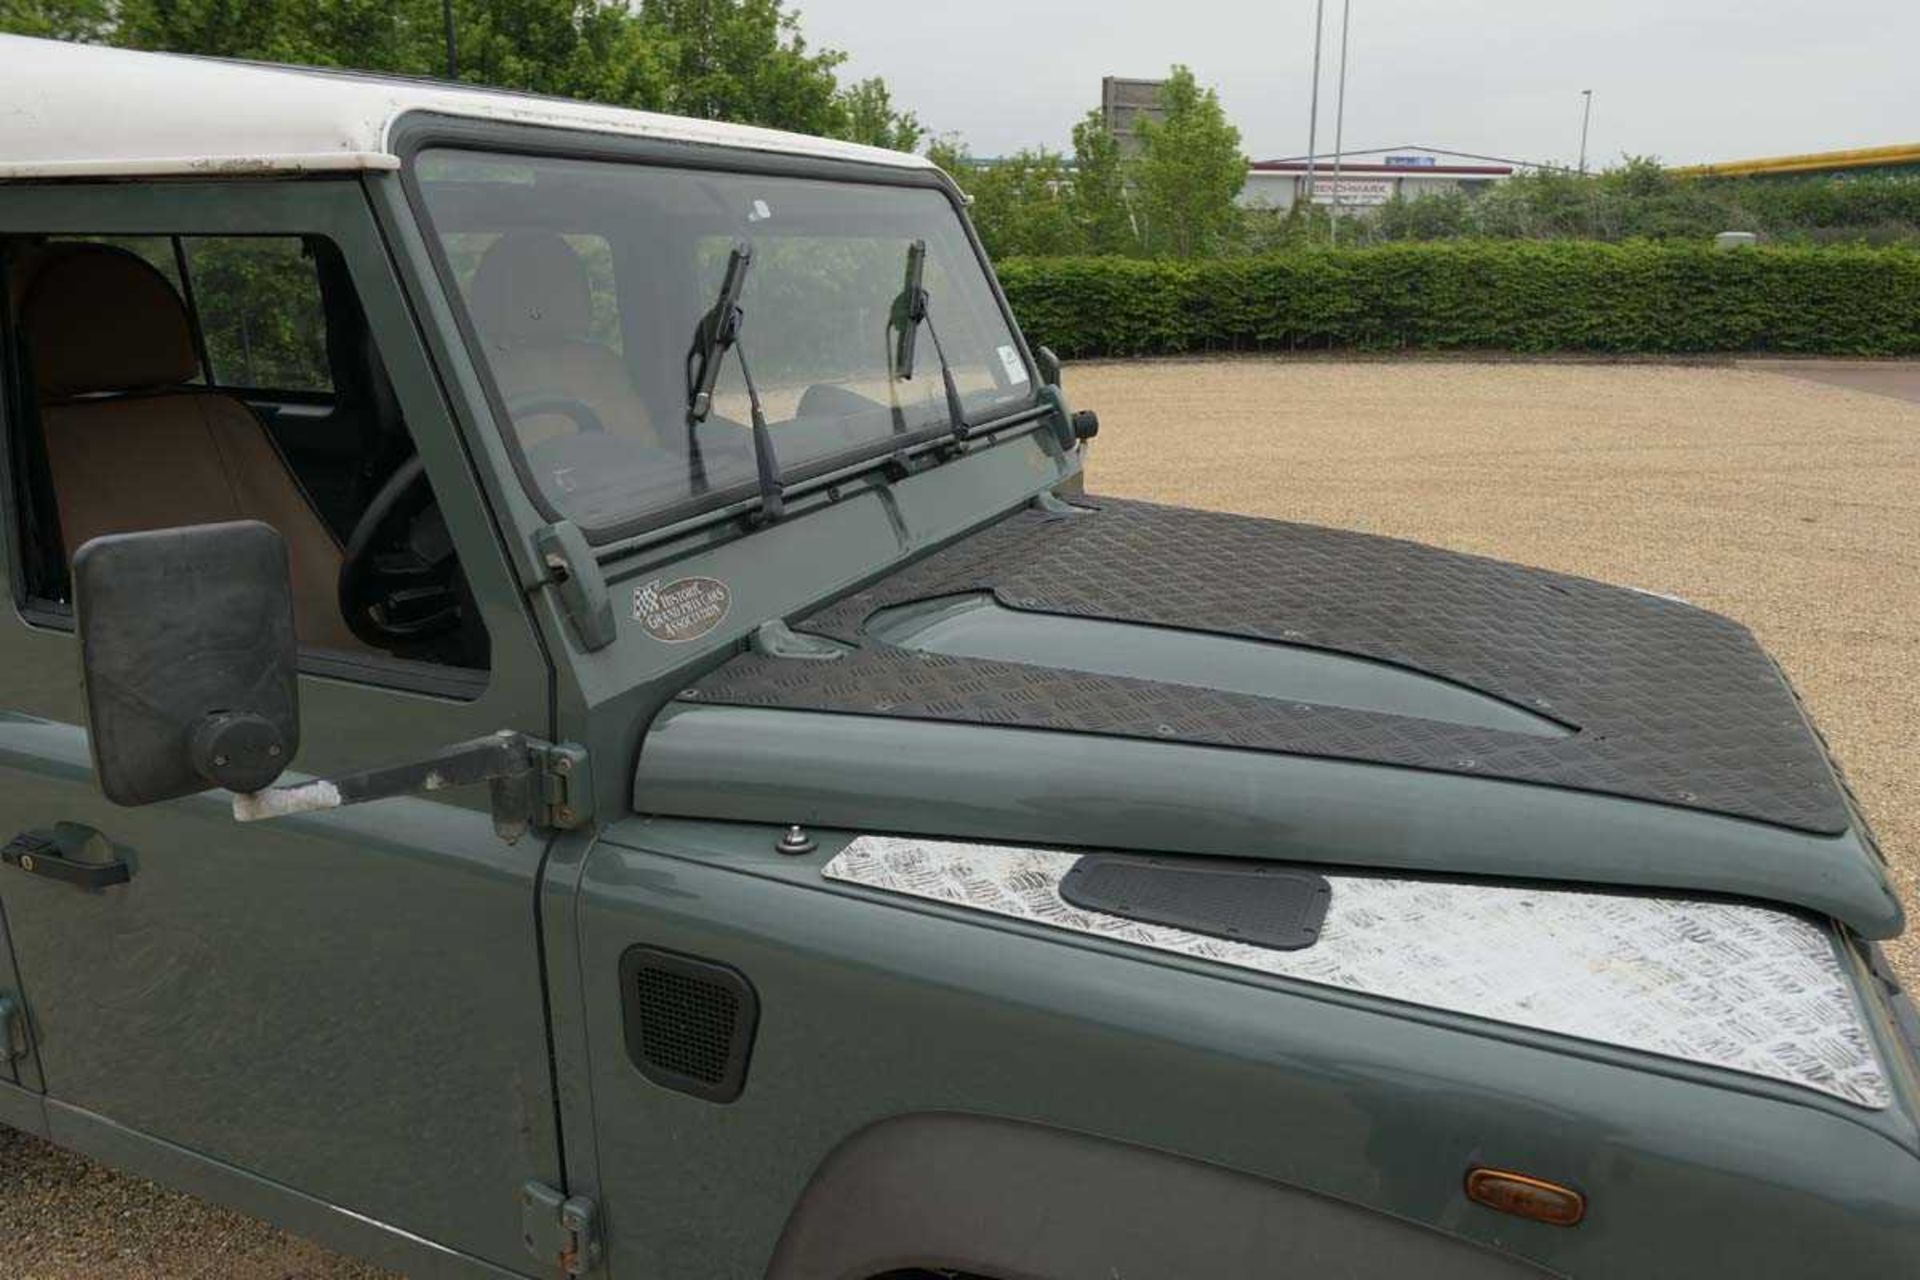 (LD58 NLV) 2008 Land Rover Defender 110 LWB station wagon estate in green, 2402cc diesel, 6-speed - Image 11 of 20